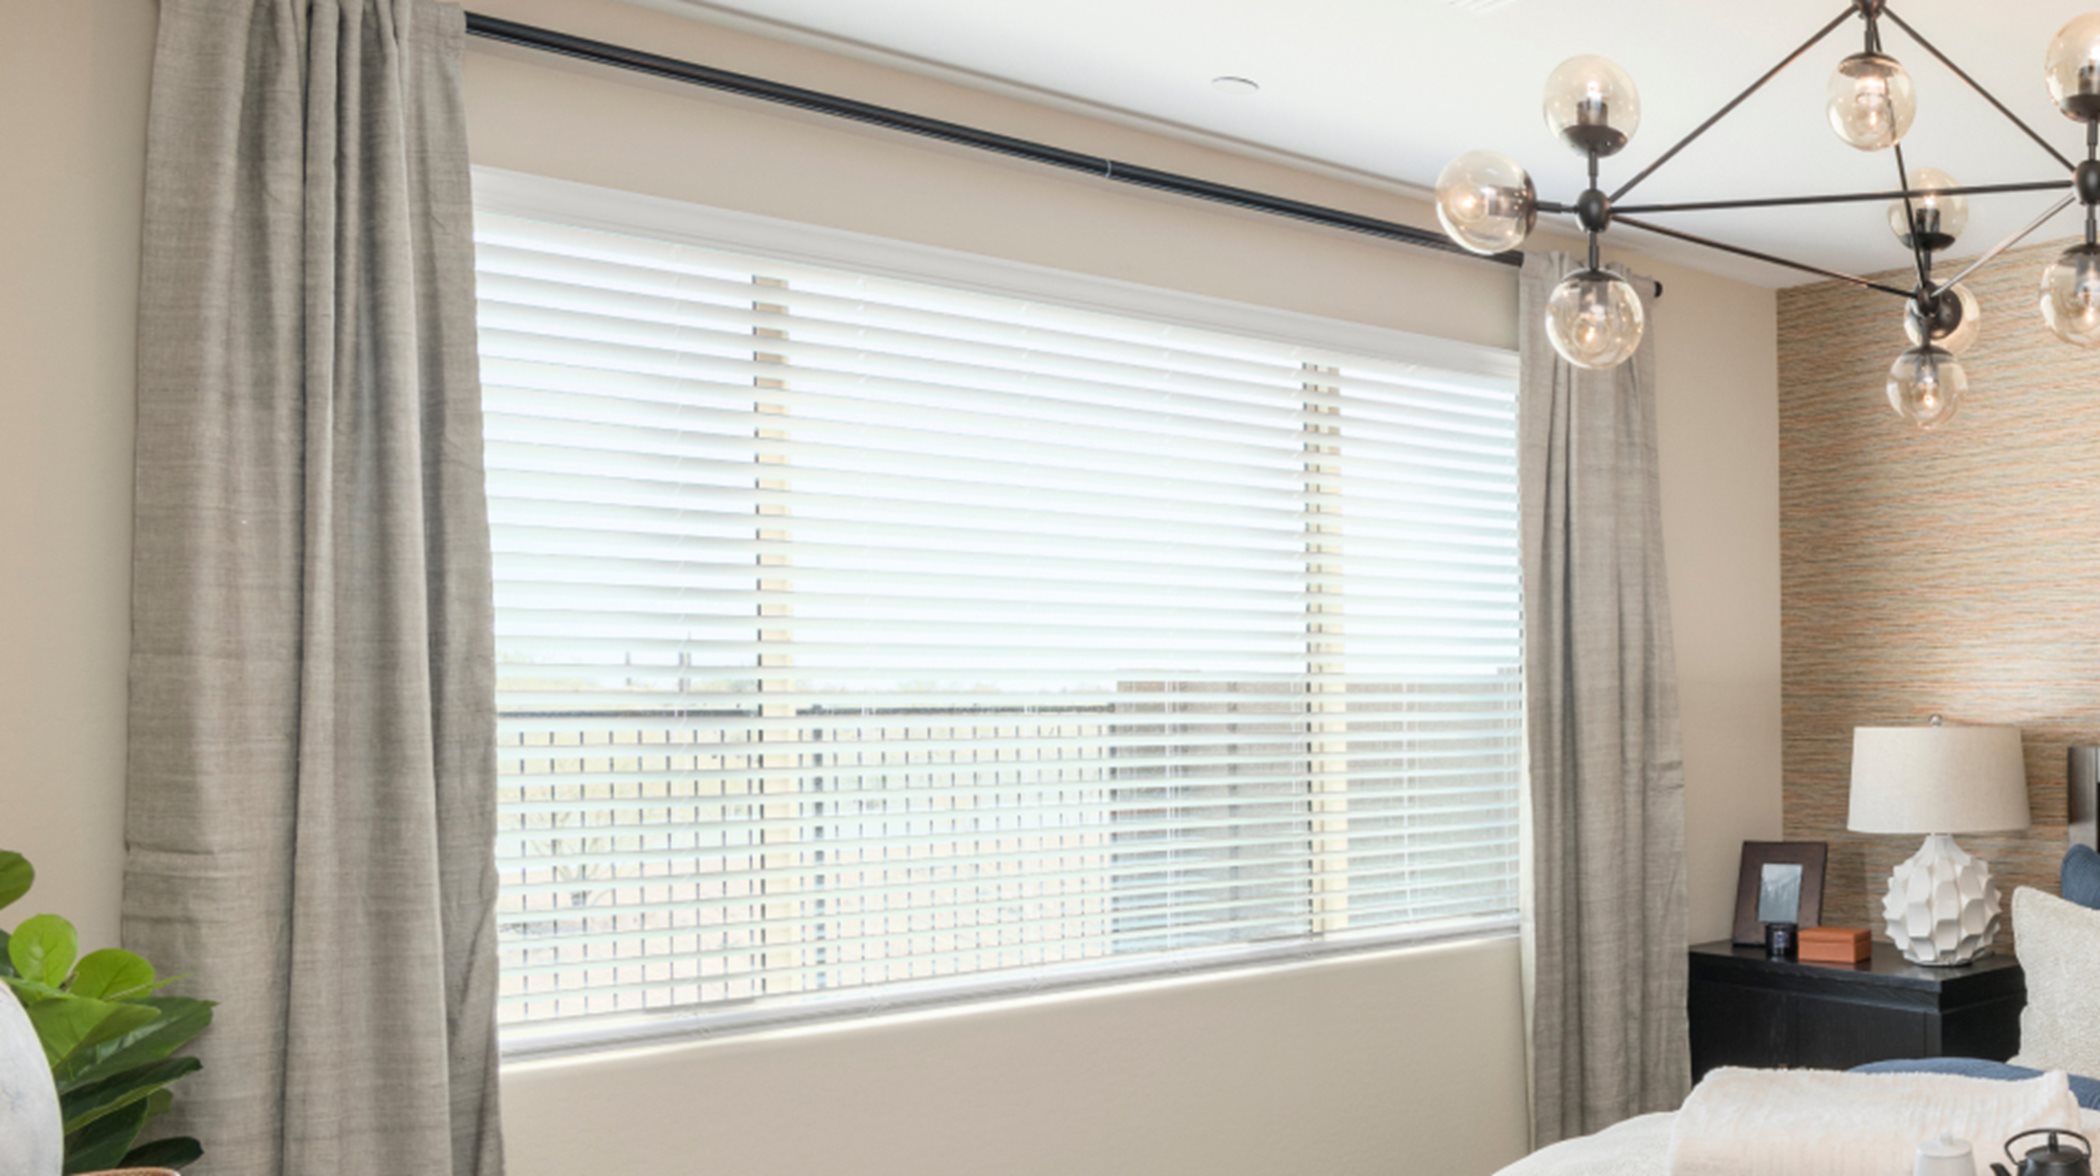 Mystic Discovery Ironwood 3518 Blinds